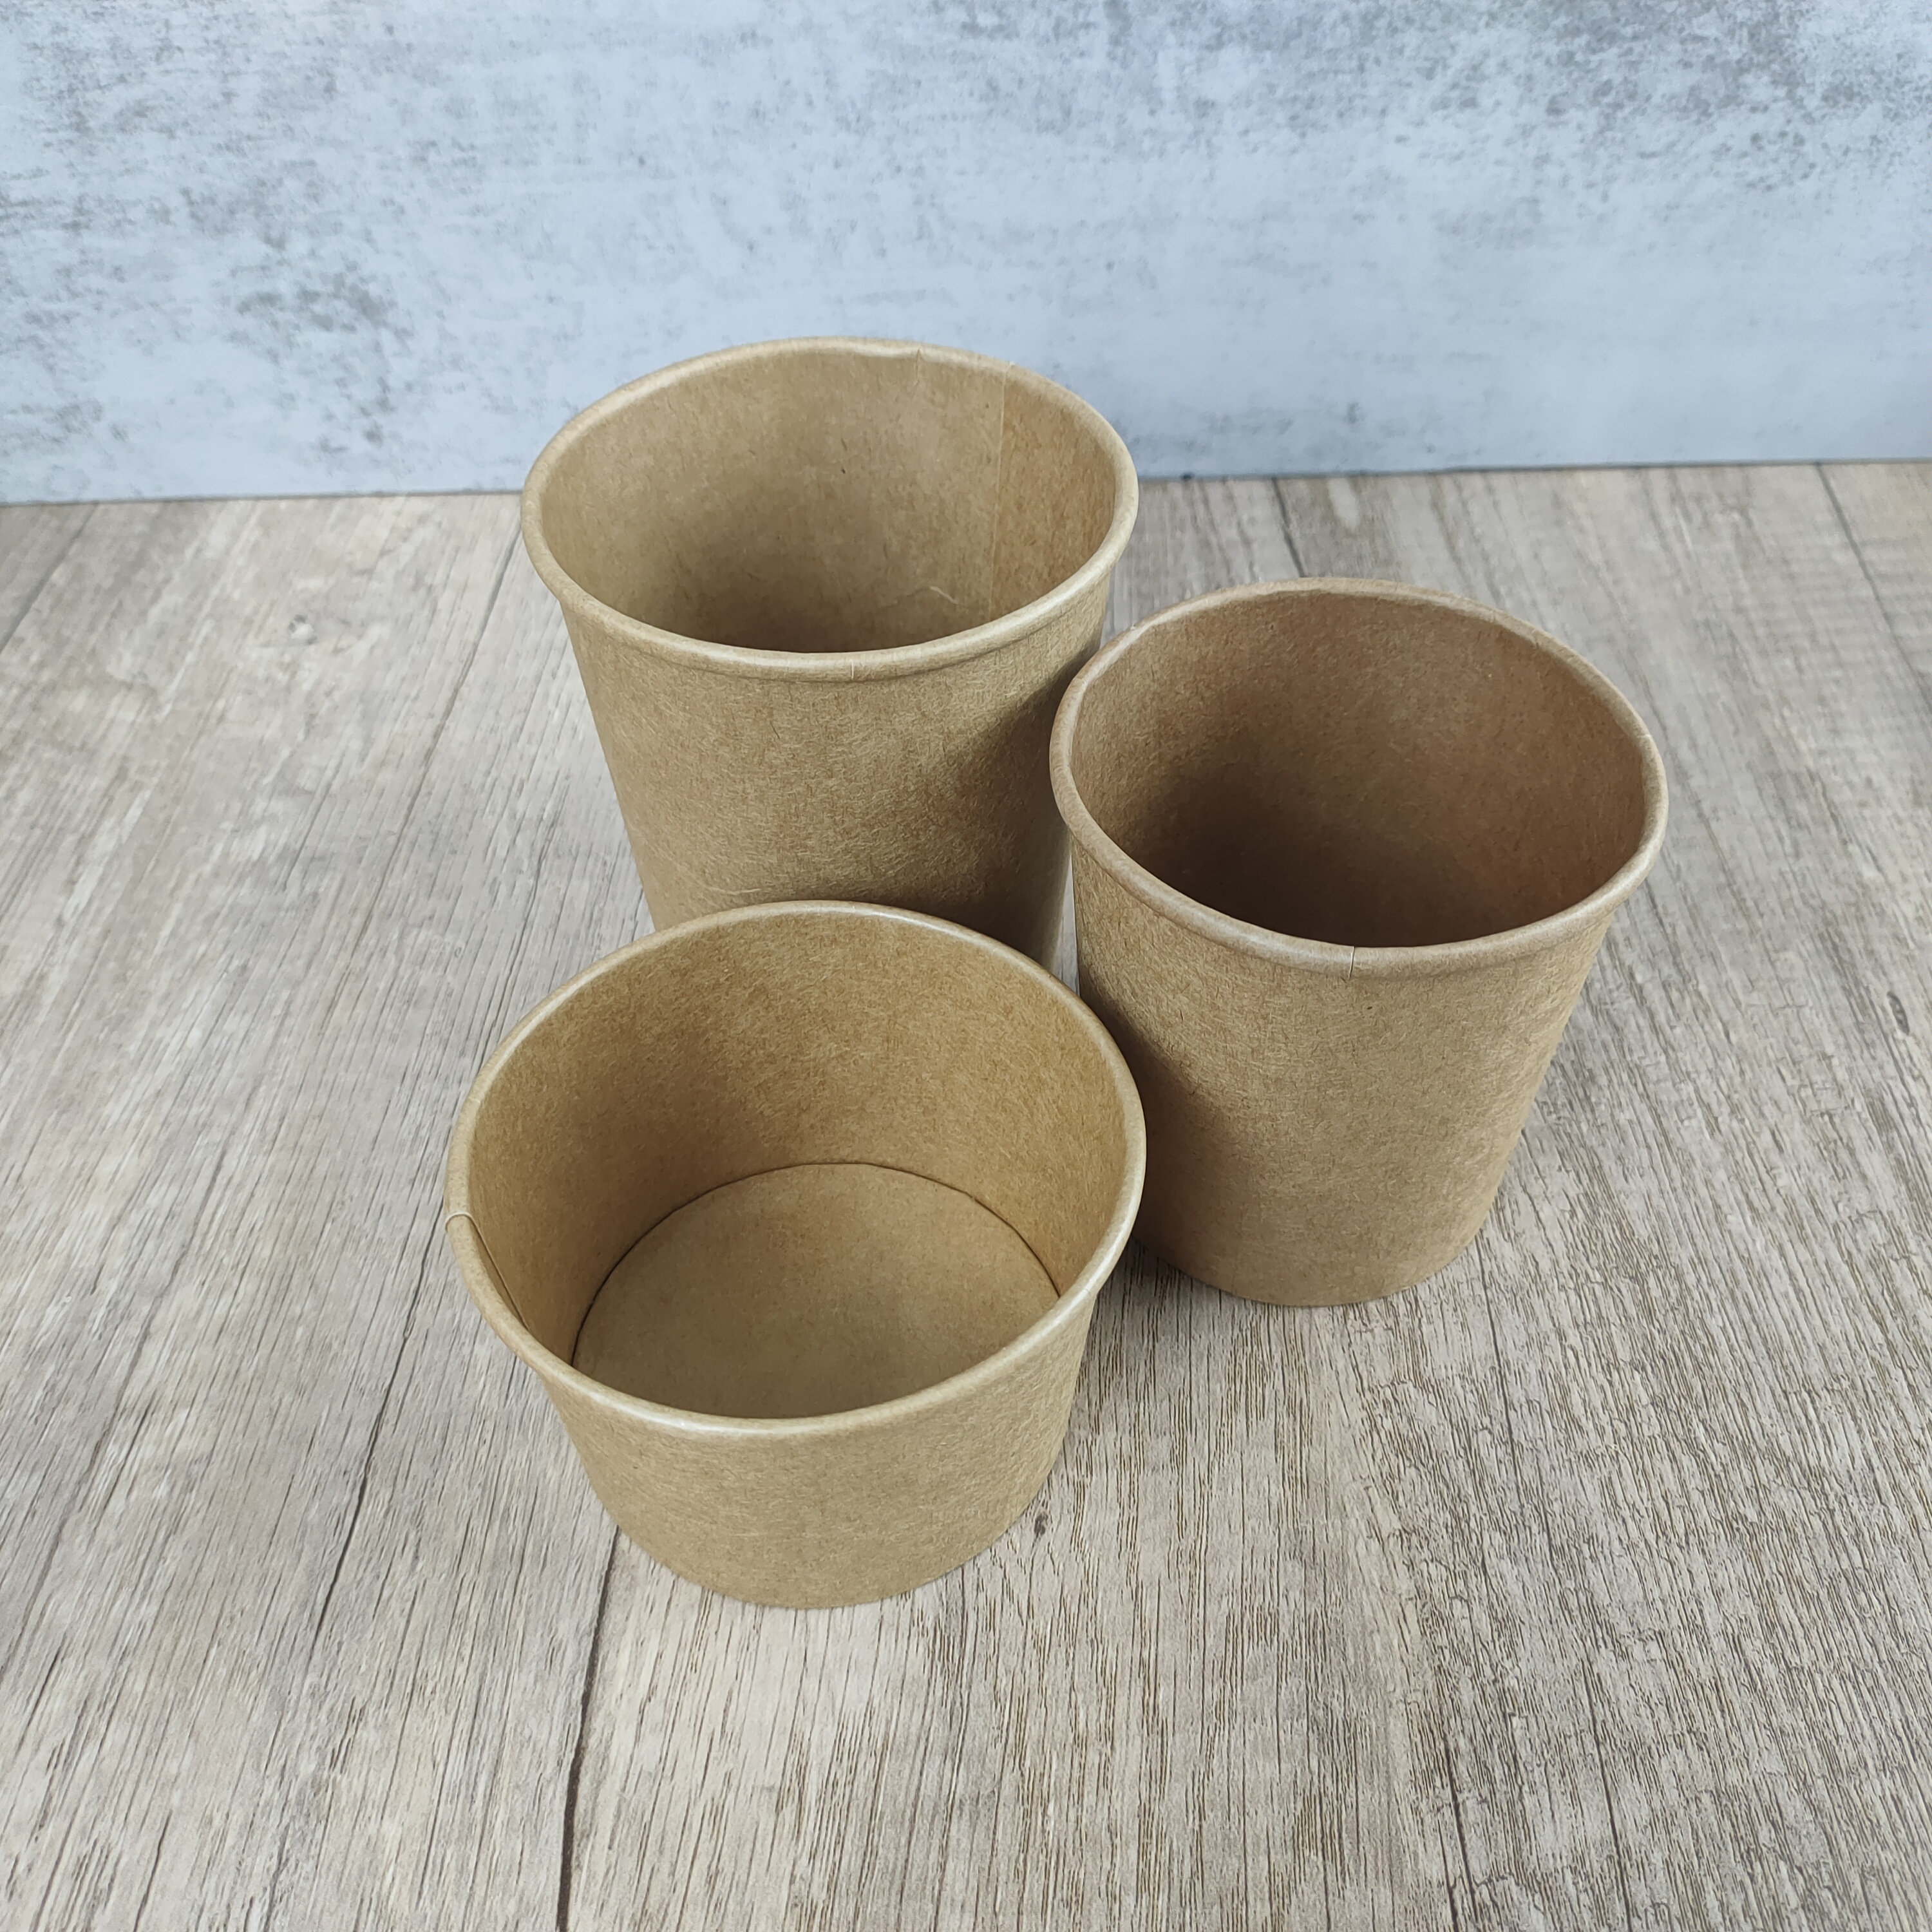 500ML 16OZ Disposable Kraft Paper Bowls with PP Lids, Food Containers Ice Cream Sundae Cups Soup Bowls Party Supplies Treat Bowls 